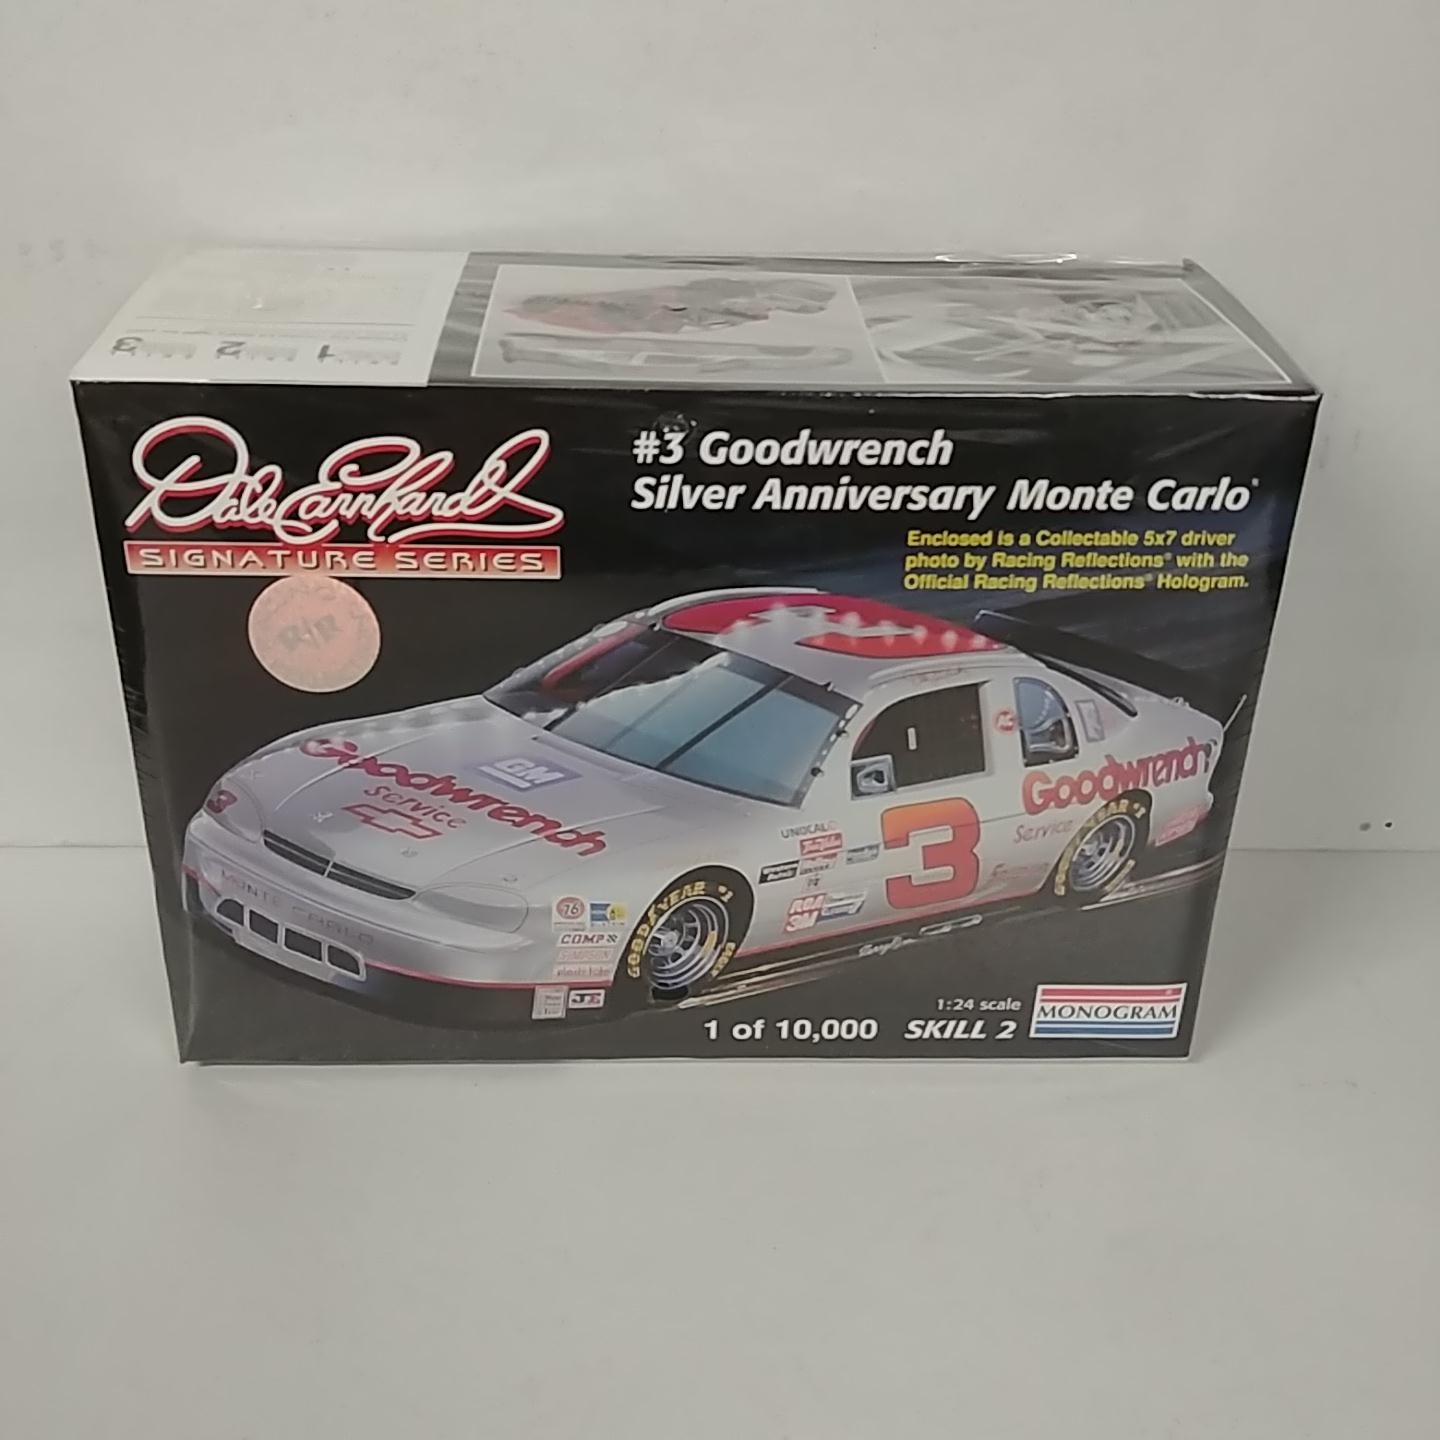 1995 Dale Earnhardt 1/24th GM Goodwrench "Silver Select" Monte Carlo model kit by Monogram